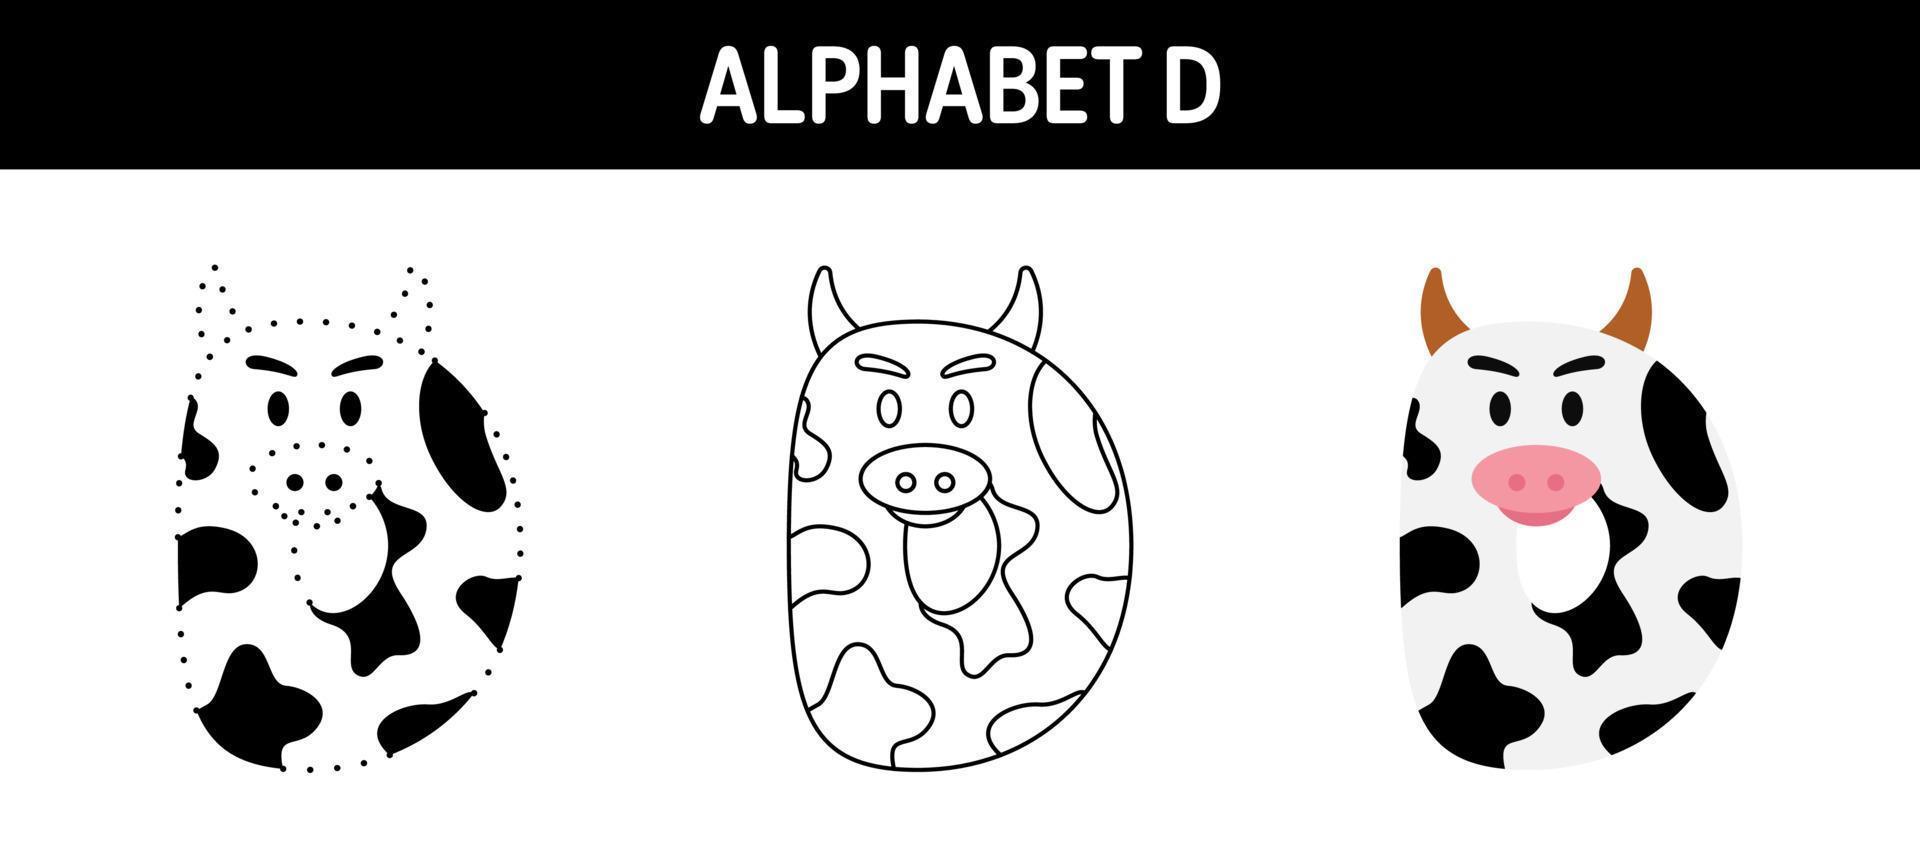 Alphabet D tracing and coloring worksheet for kids vector